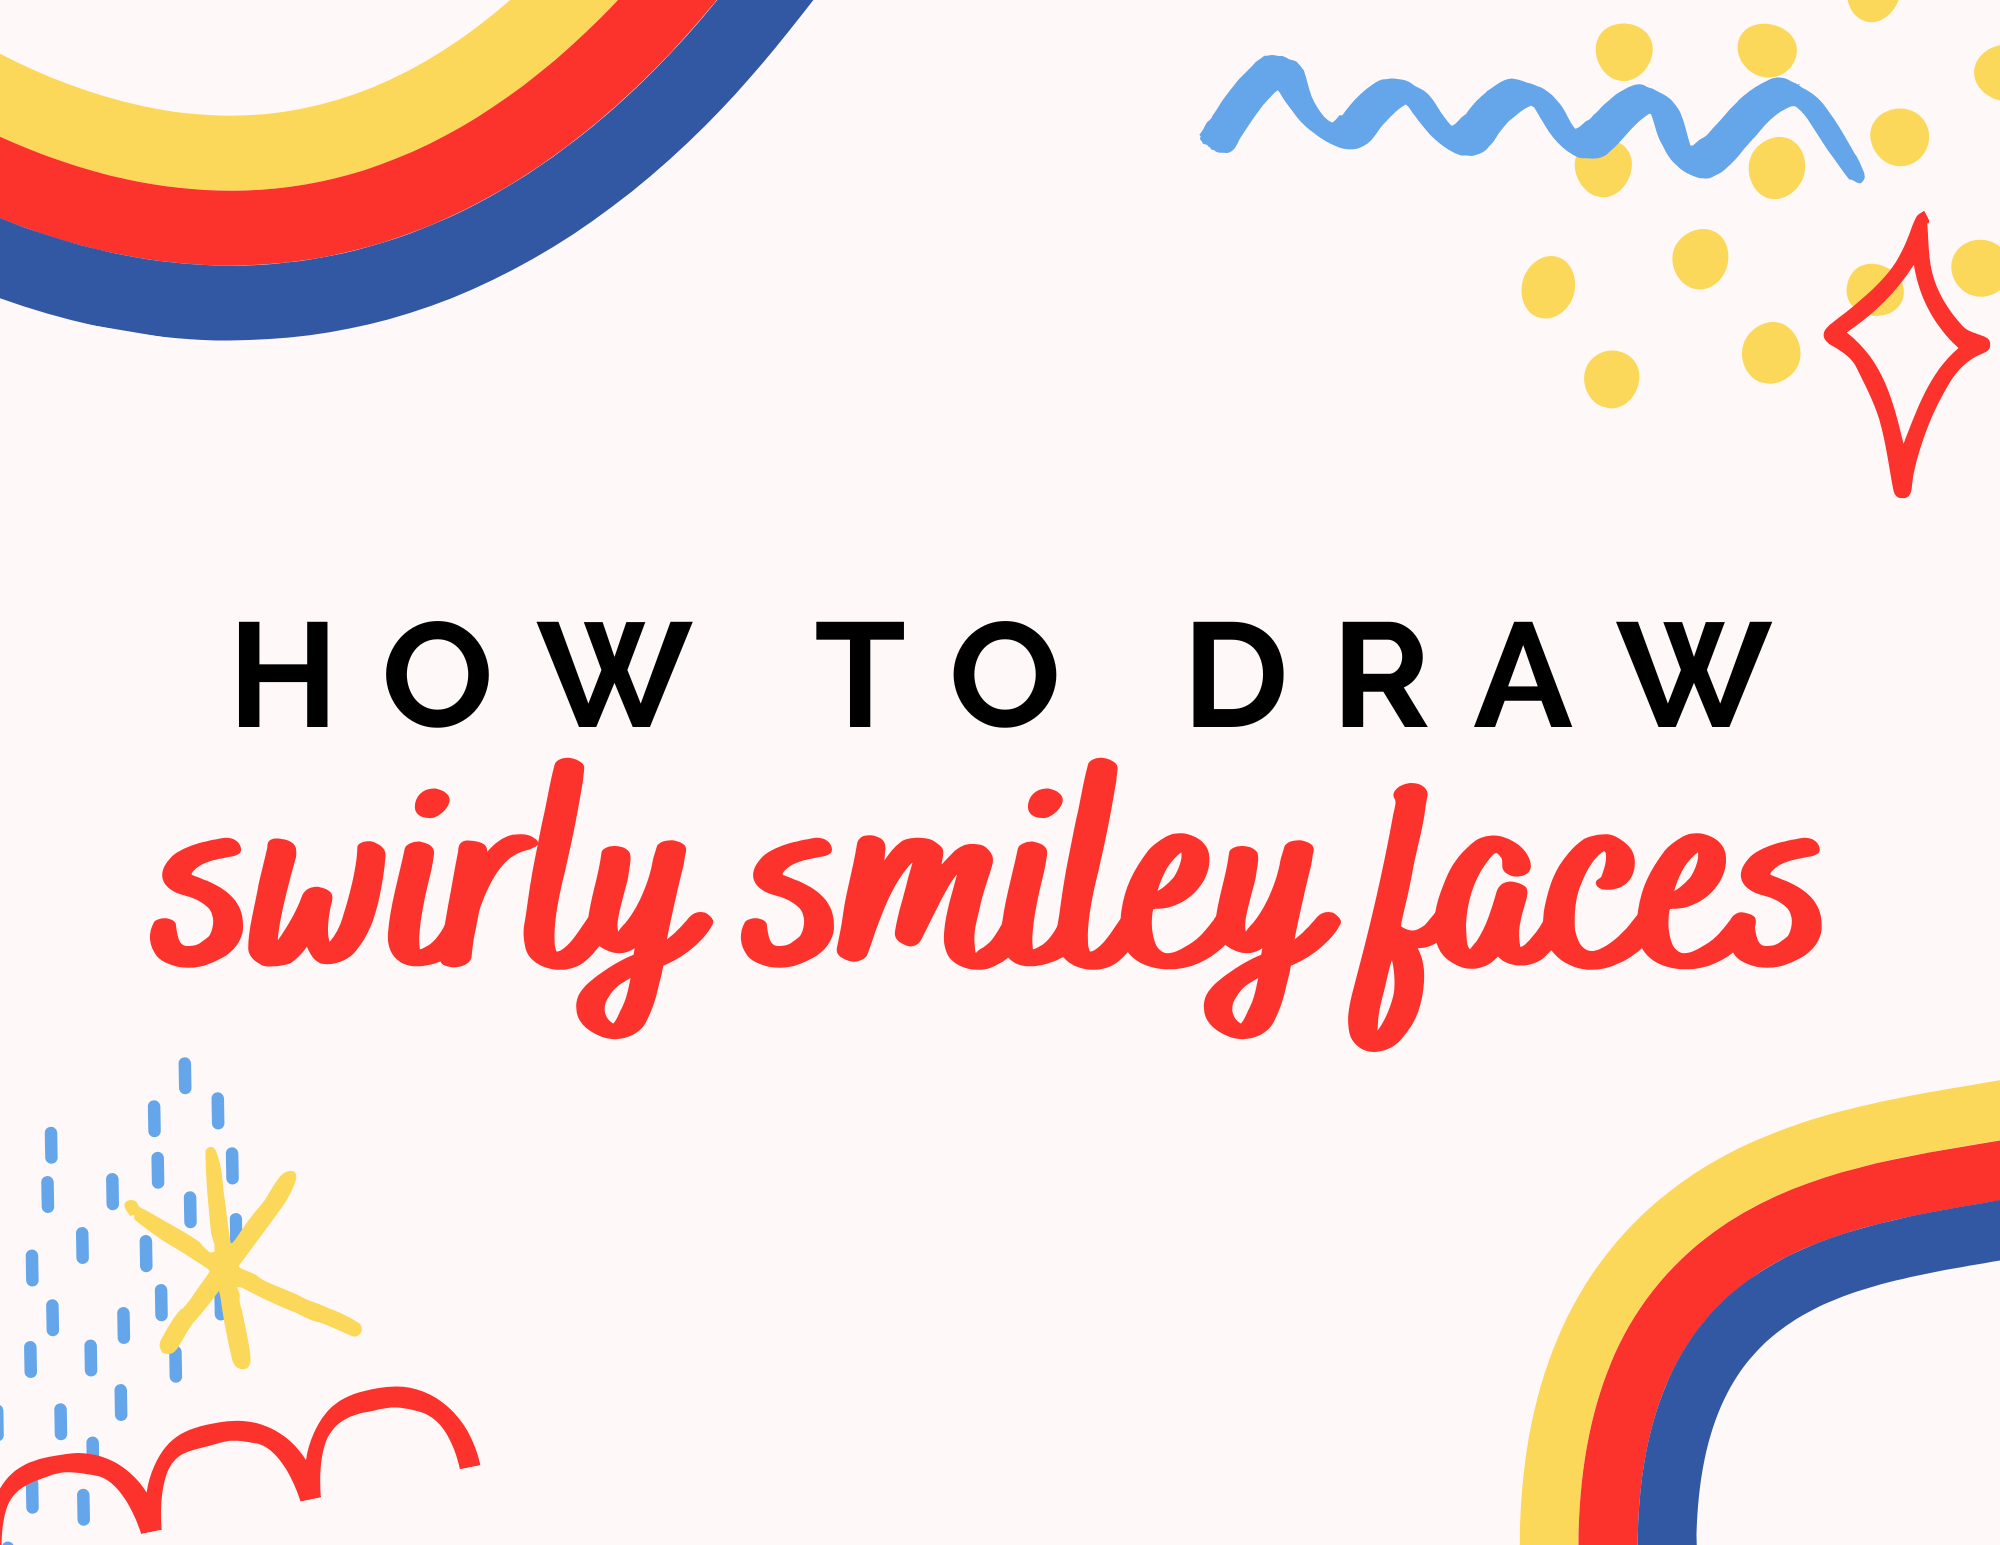 How to Draw Swirly Smiley Faces